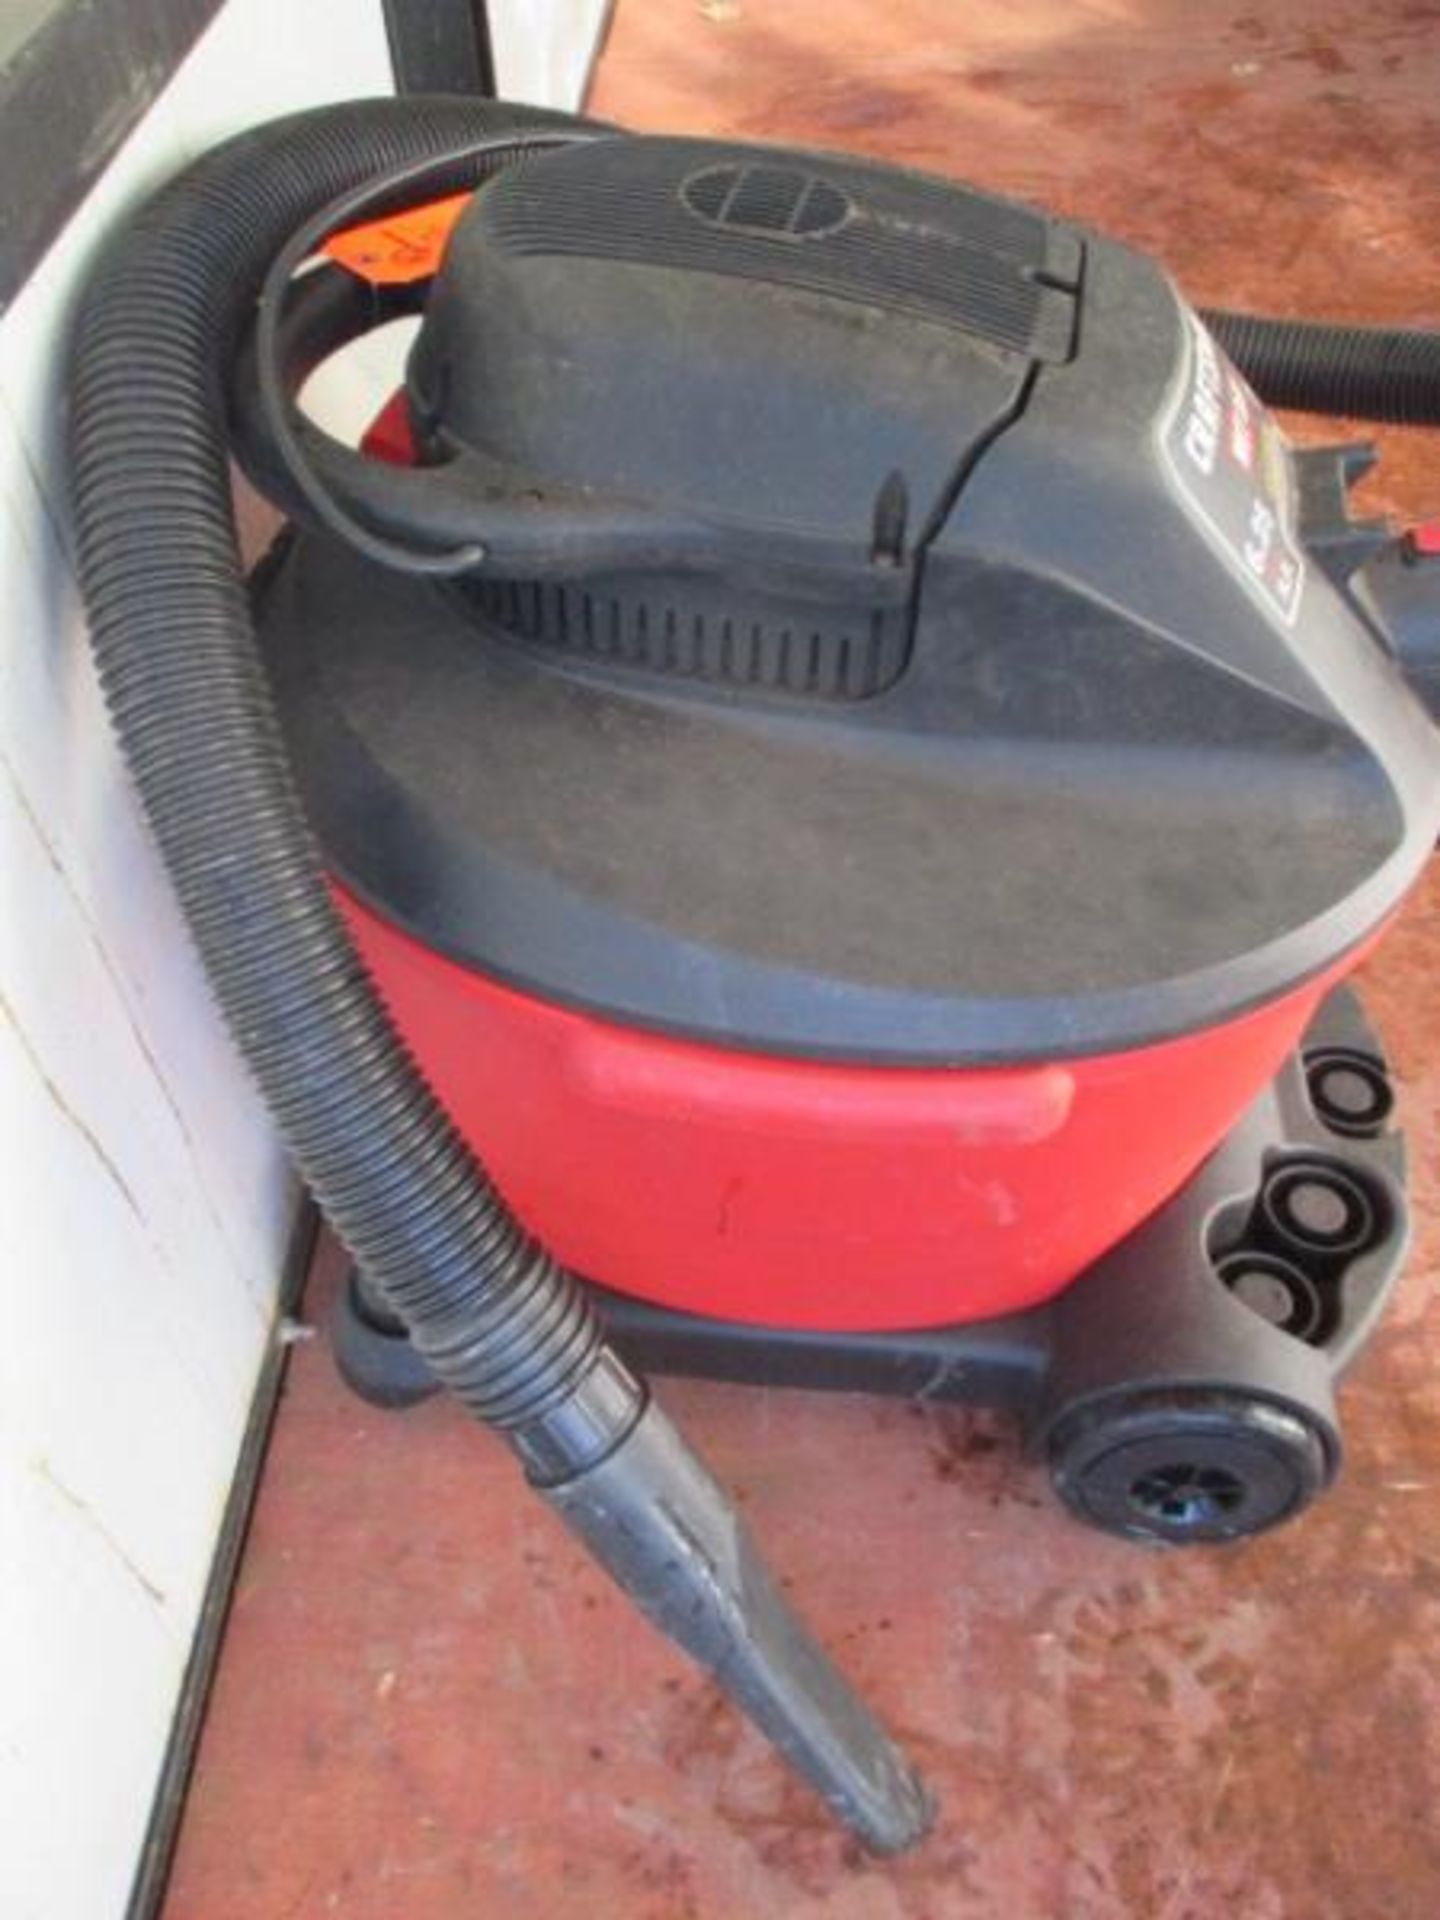 Crafsman Wet / Dry Vac, 16 Gallon, 6.25 Peak HP, 210 Blower MPH, Red 210 Blower MPH, Red - Image 4 of 5